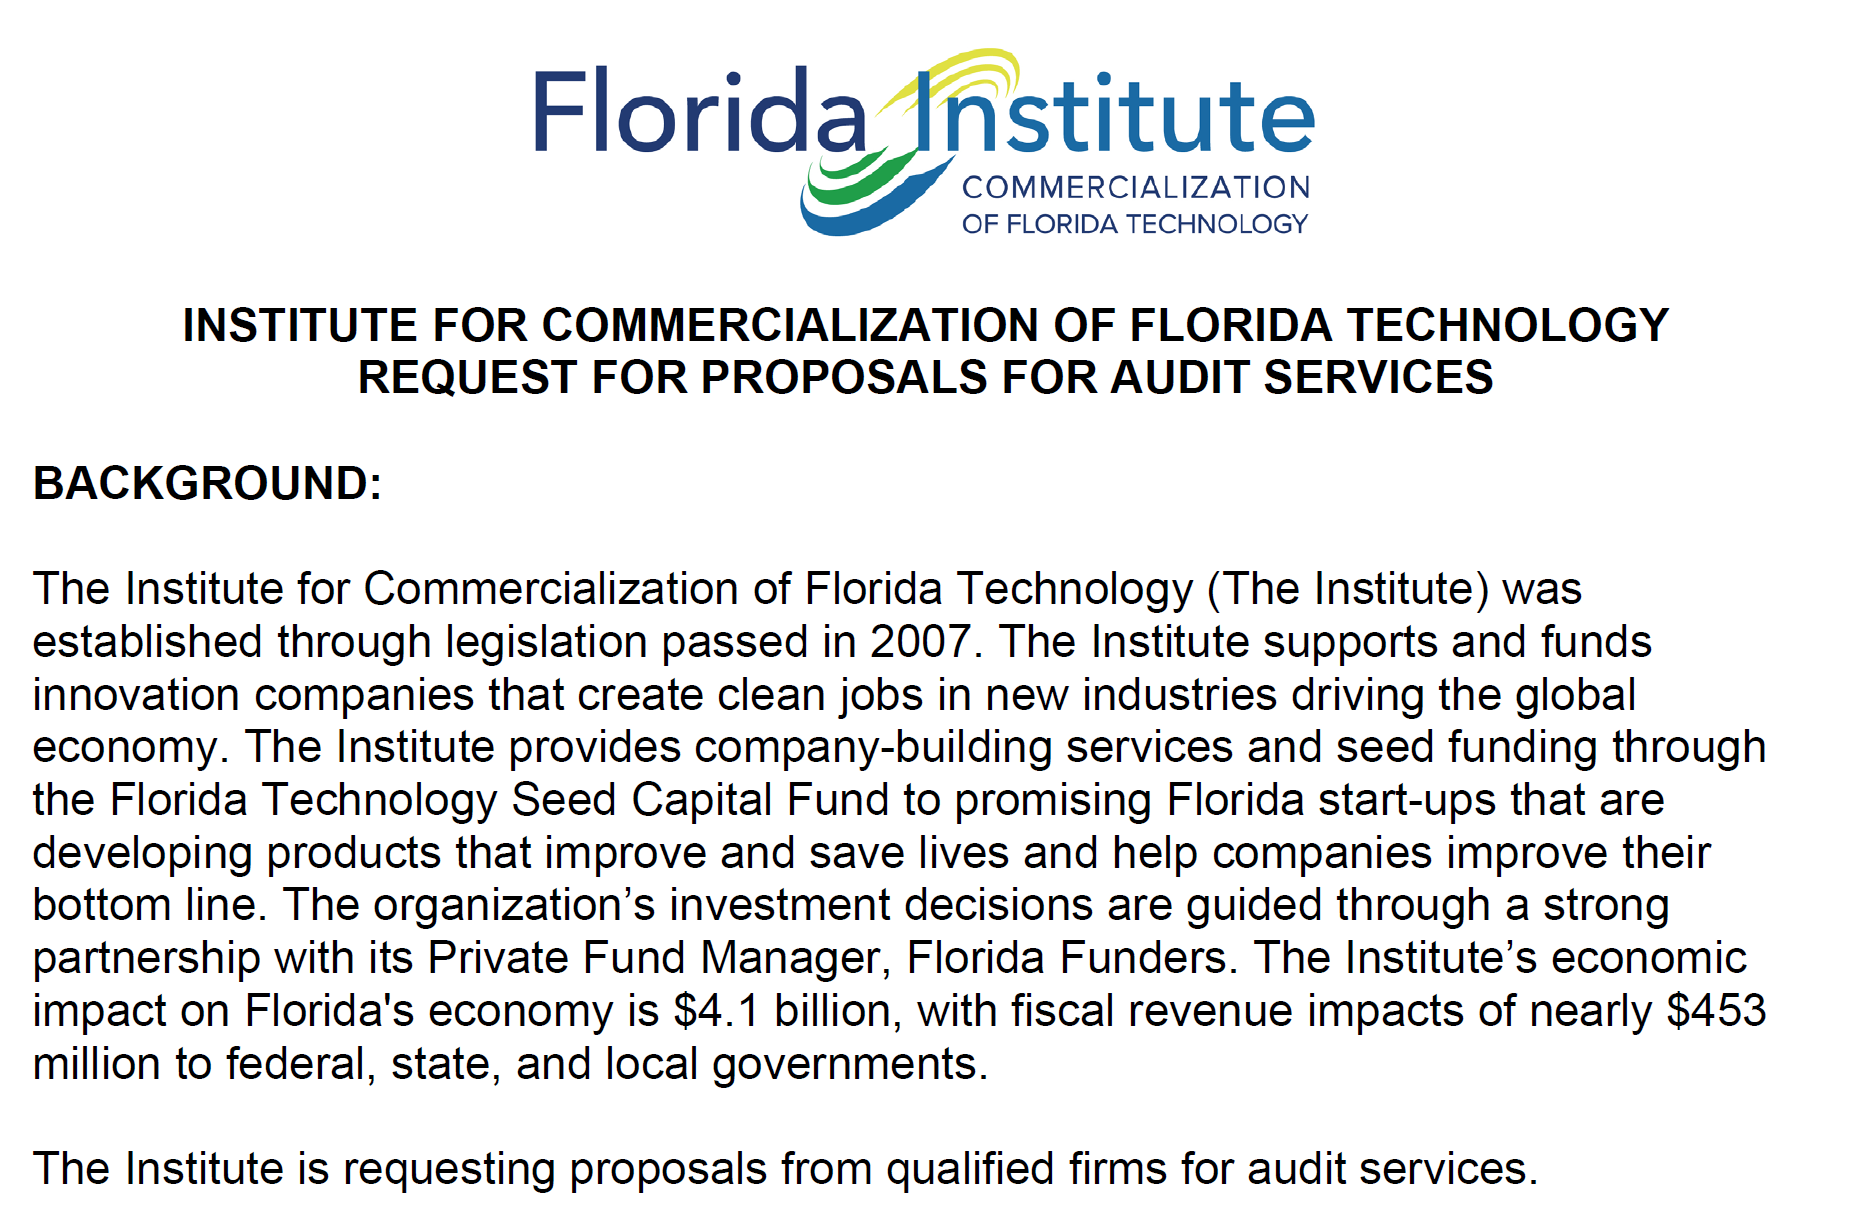 Request for Proposals for Audit Services